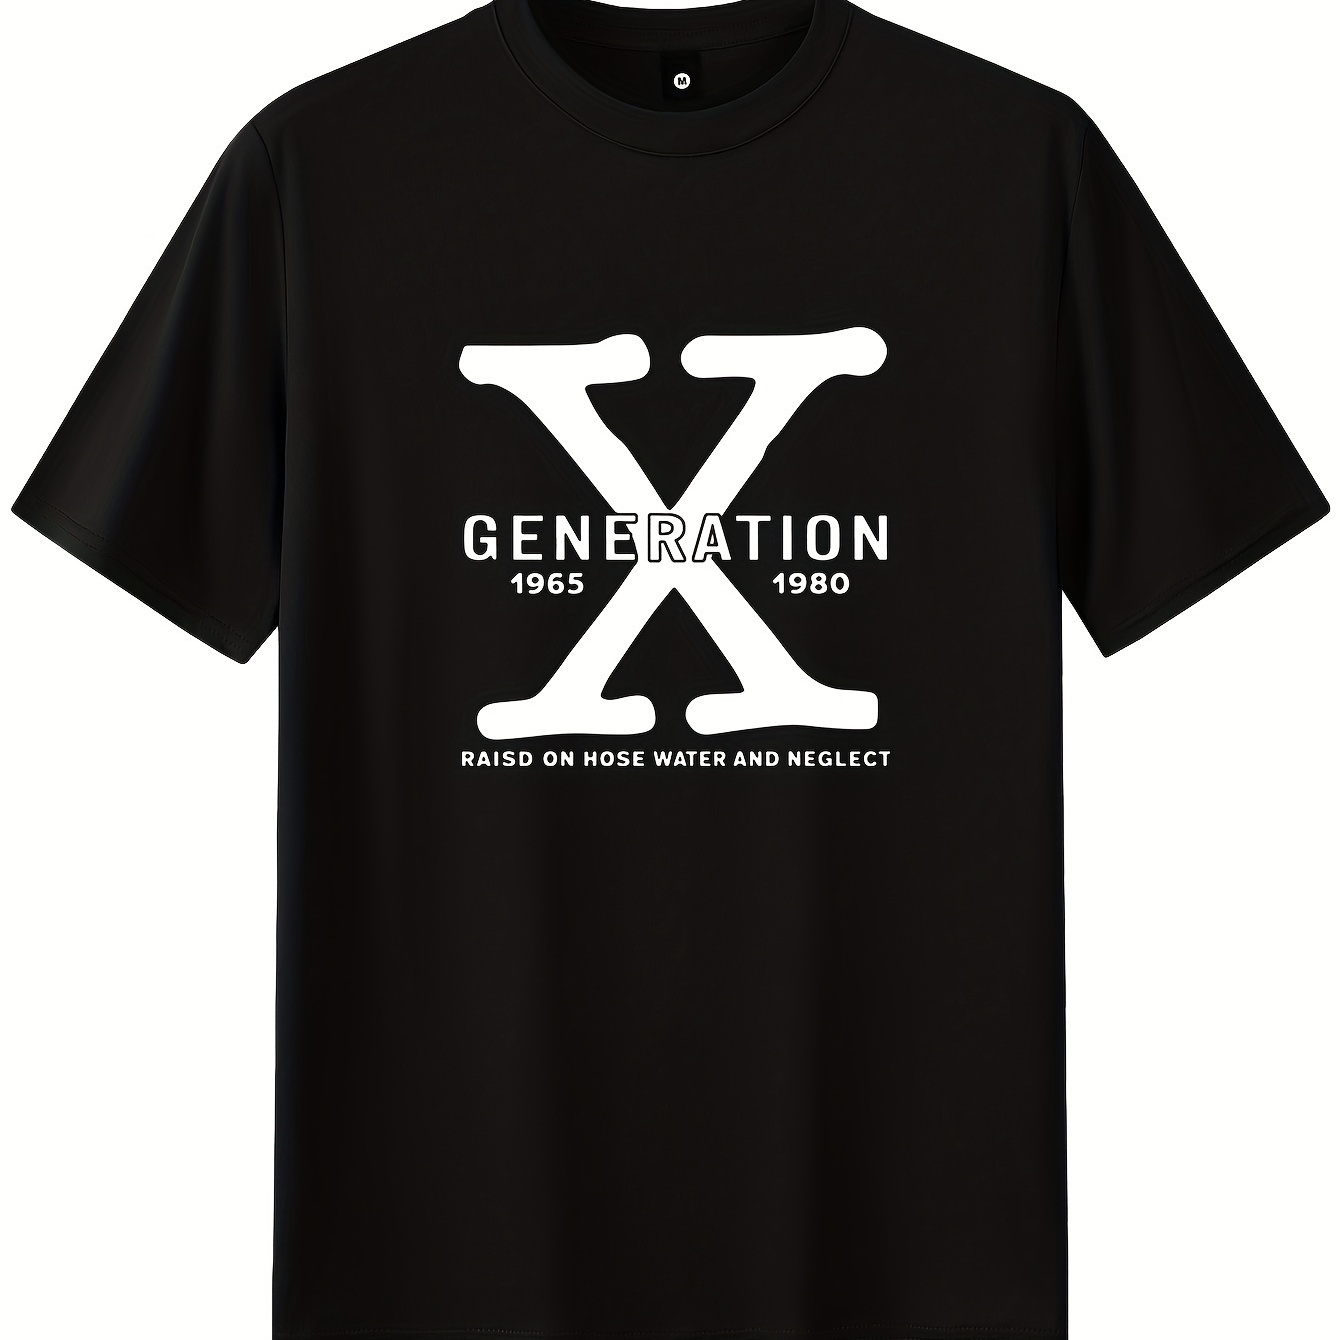 

Generation X Letter Print Men's Crew Neck Short Sleeve Tees, Summer Trendy T-shirt, Casual Comfortable Versatile Top For Daily Wear